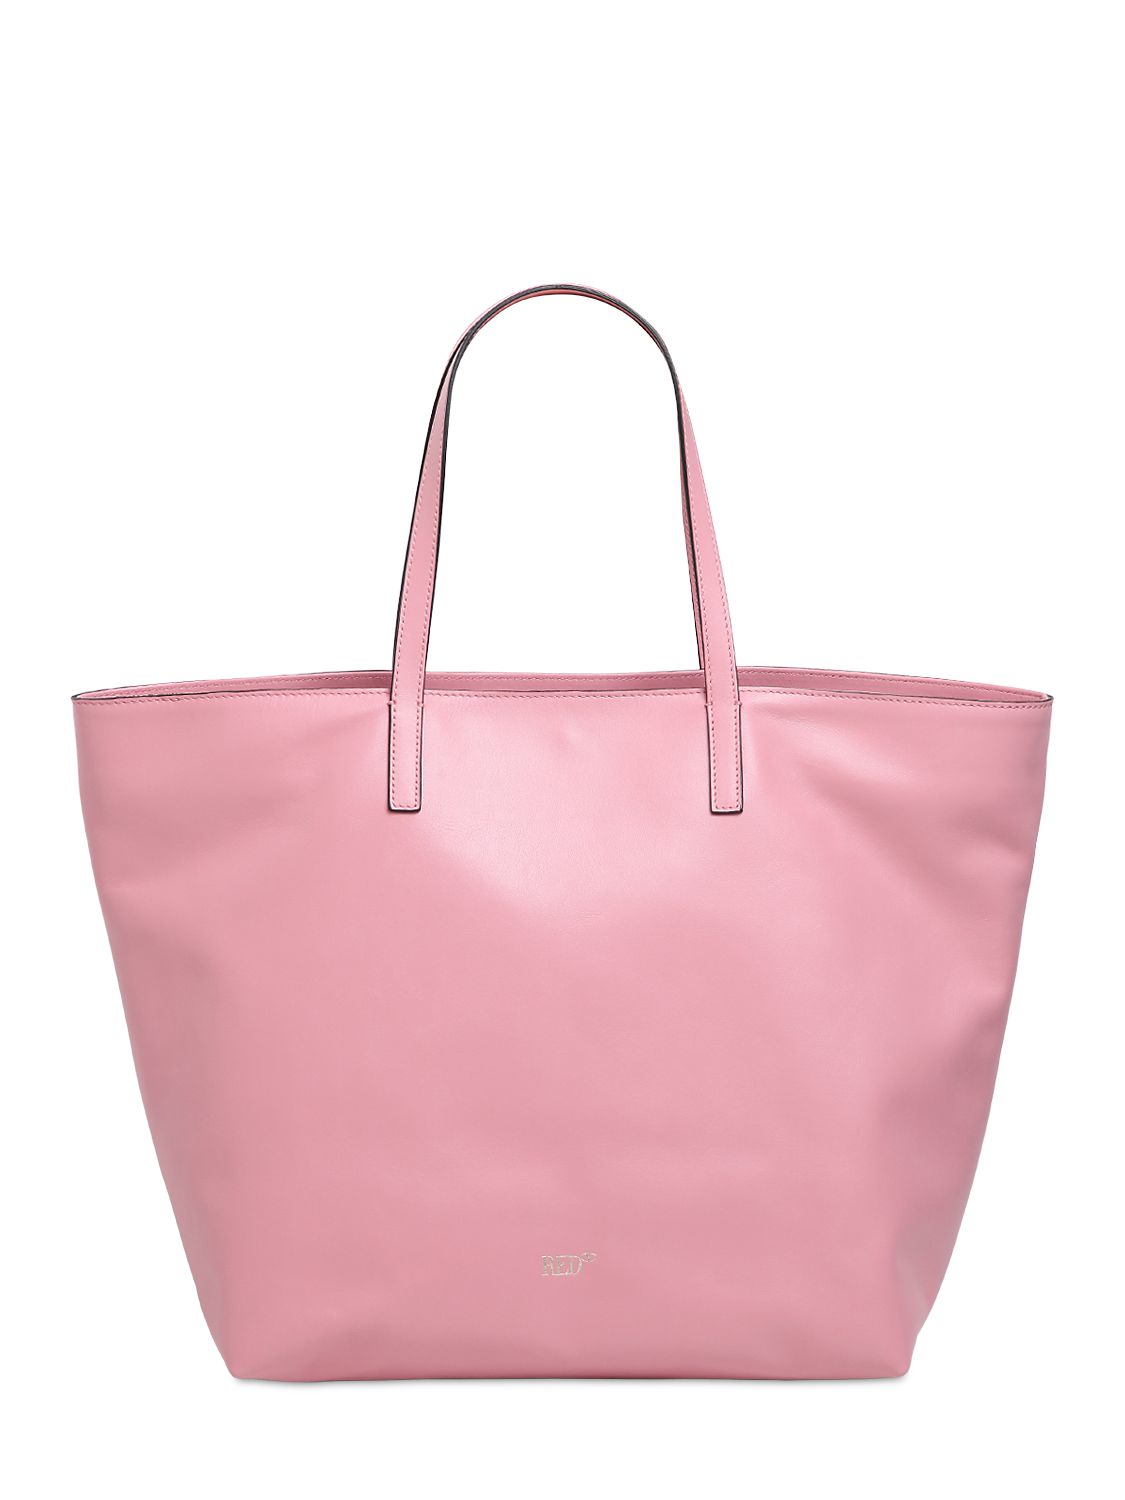 Lyst - Red Valentino Flower Embellished Leather Tote Bag in Pink